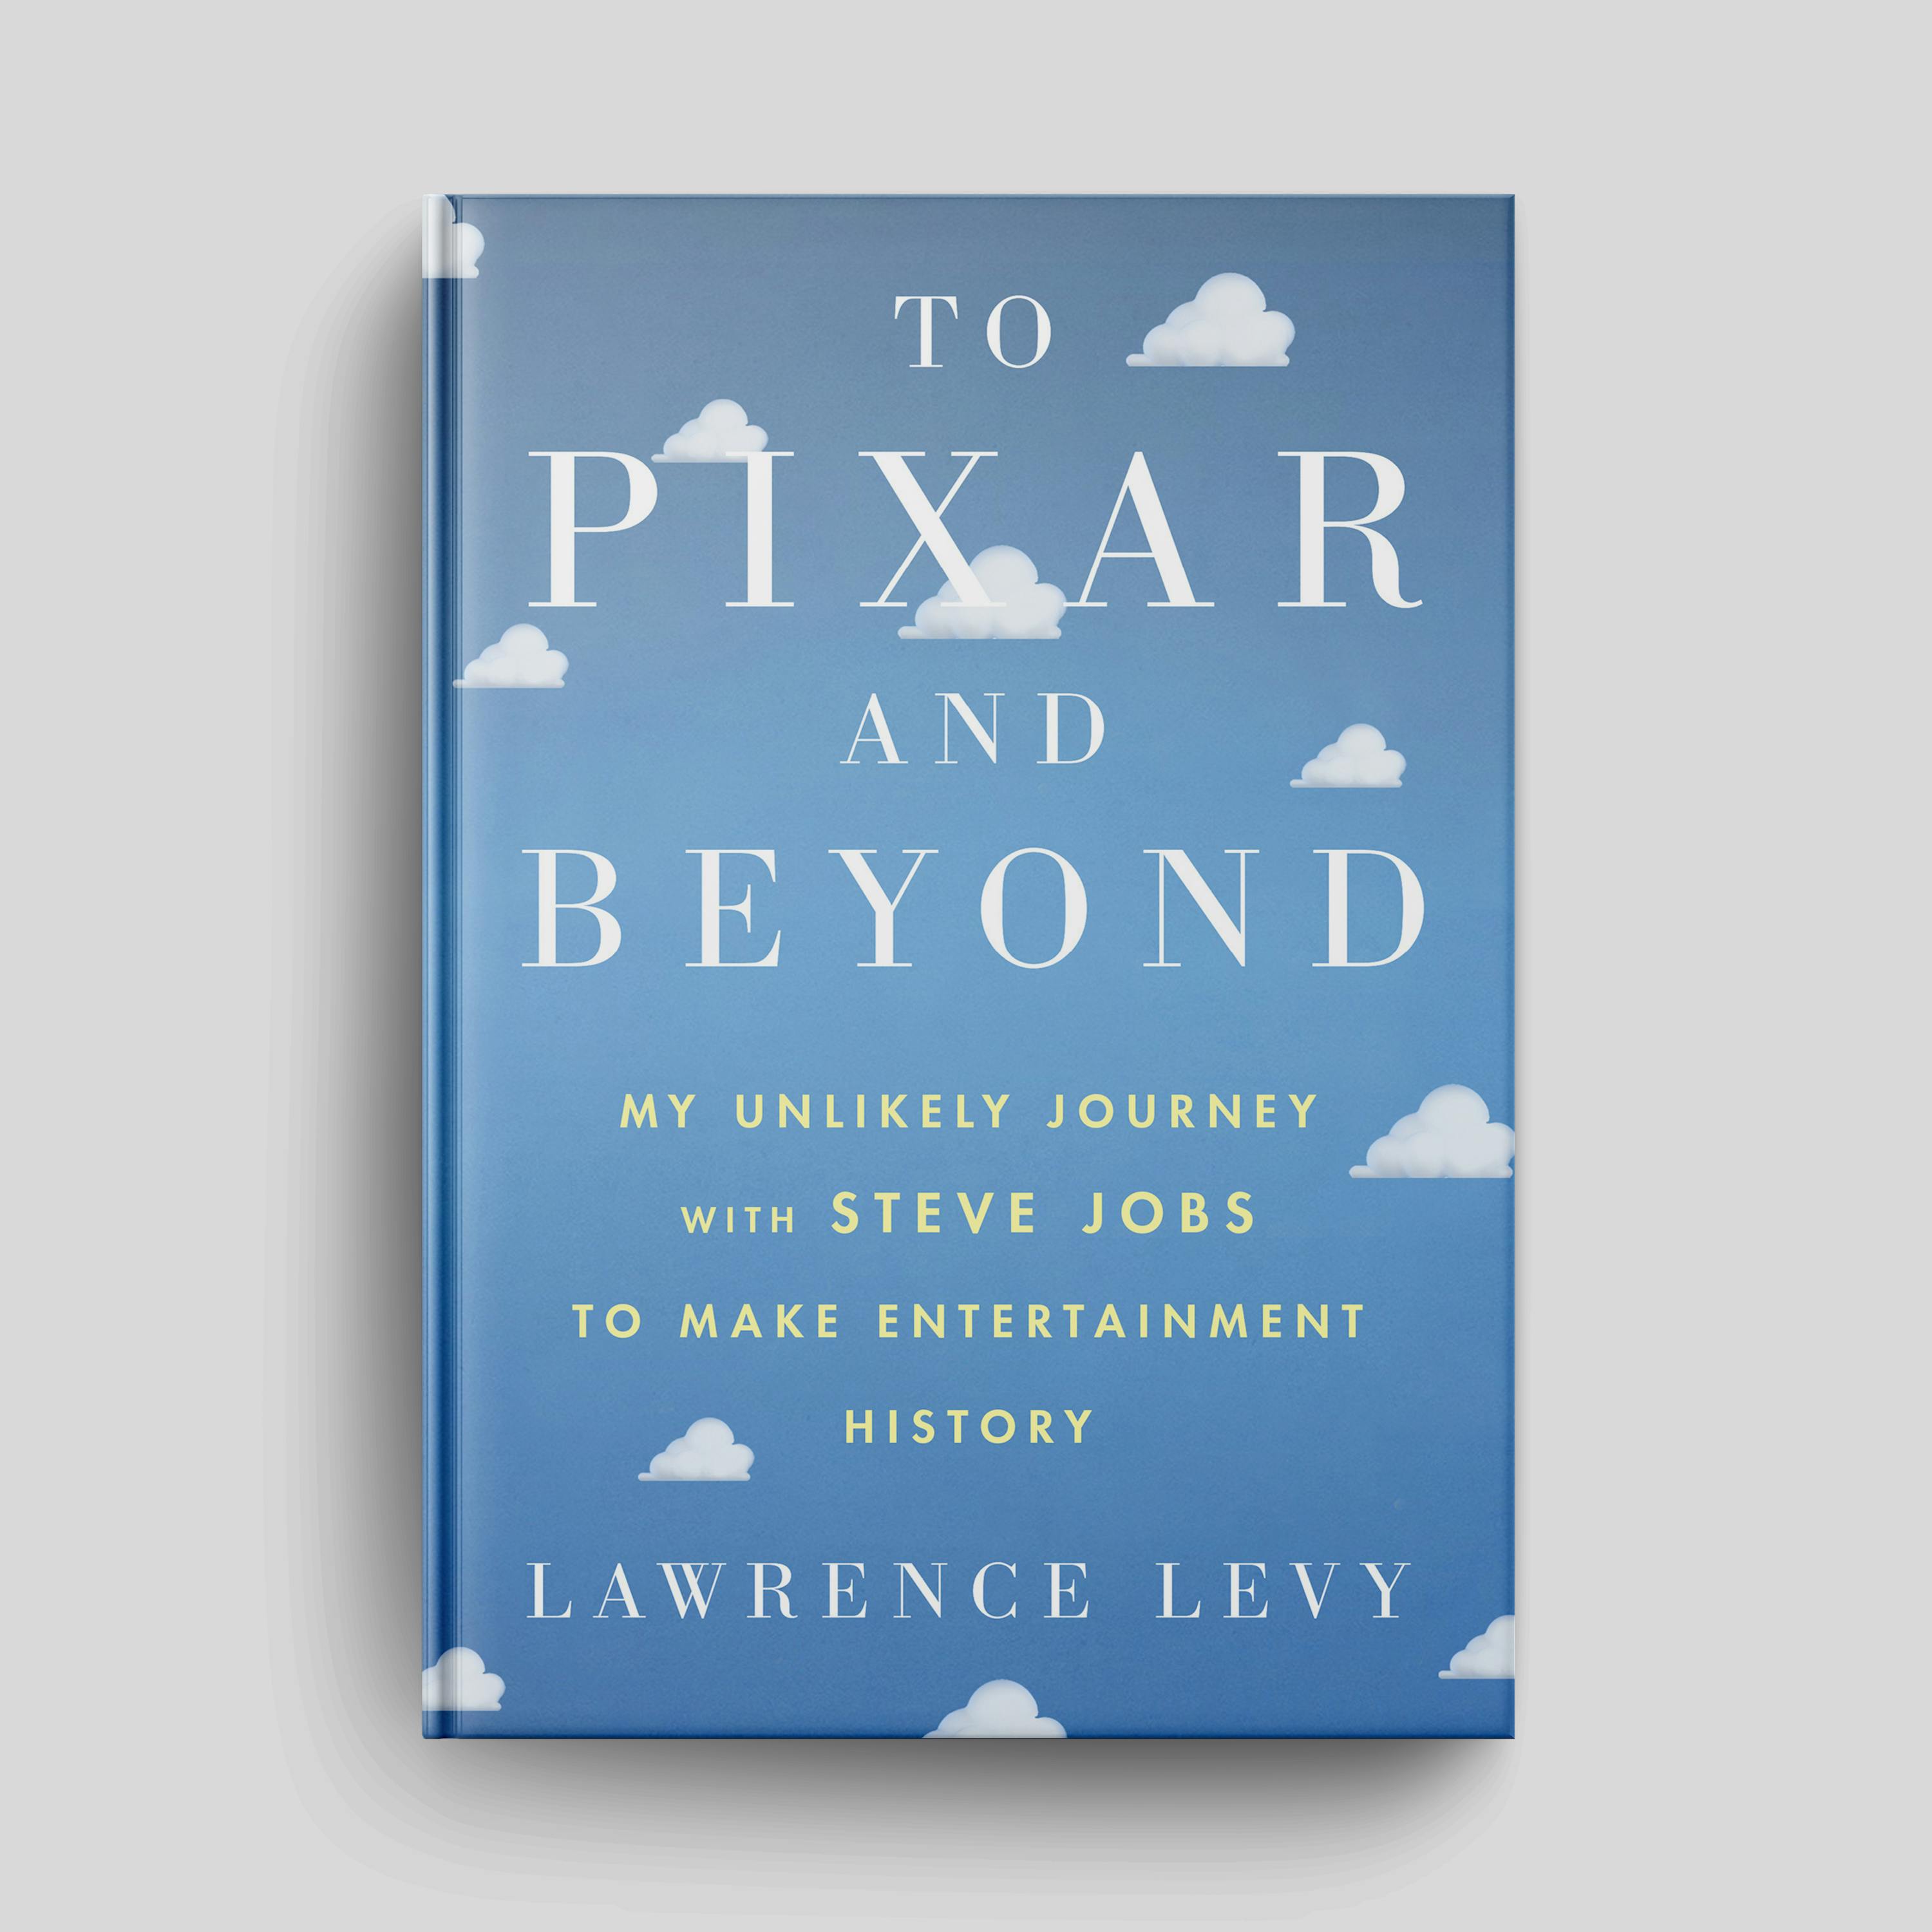 Trailer - Book: ”To Pixar And Beyond: My Unlikely Journey with Steve Jobs to Make Entertainment History” by Lawrence Levy | Episode #183